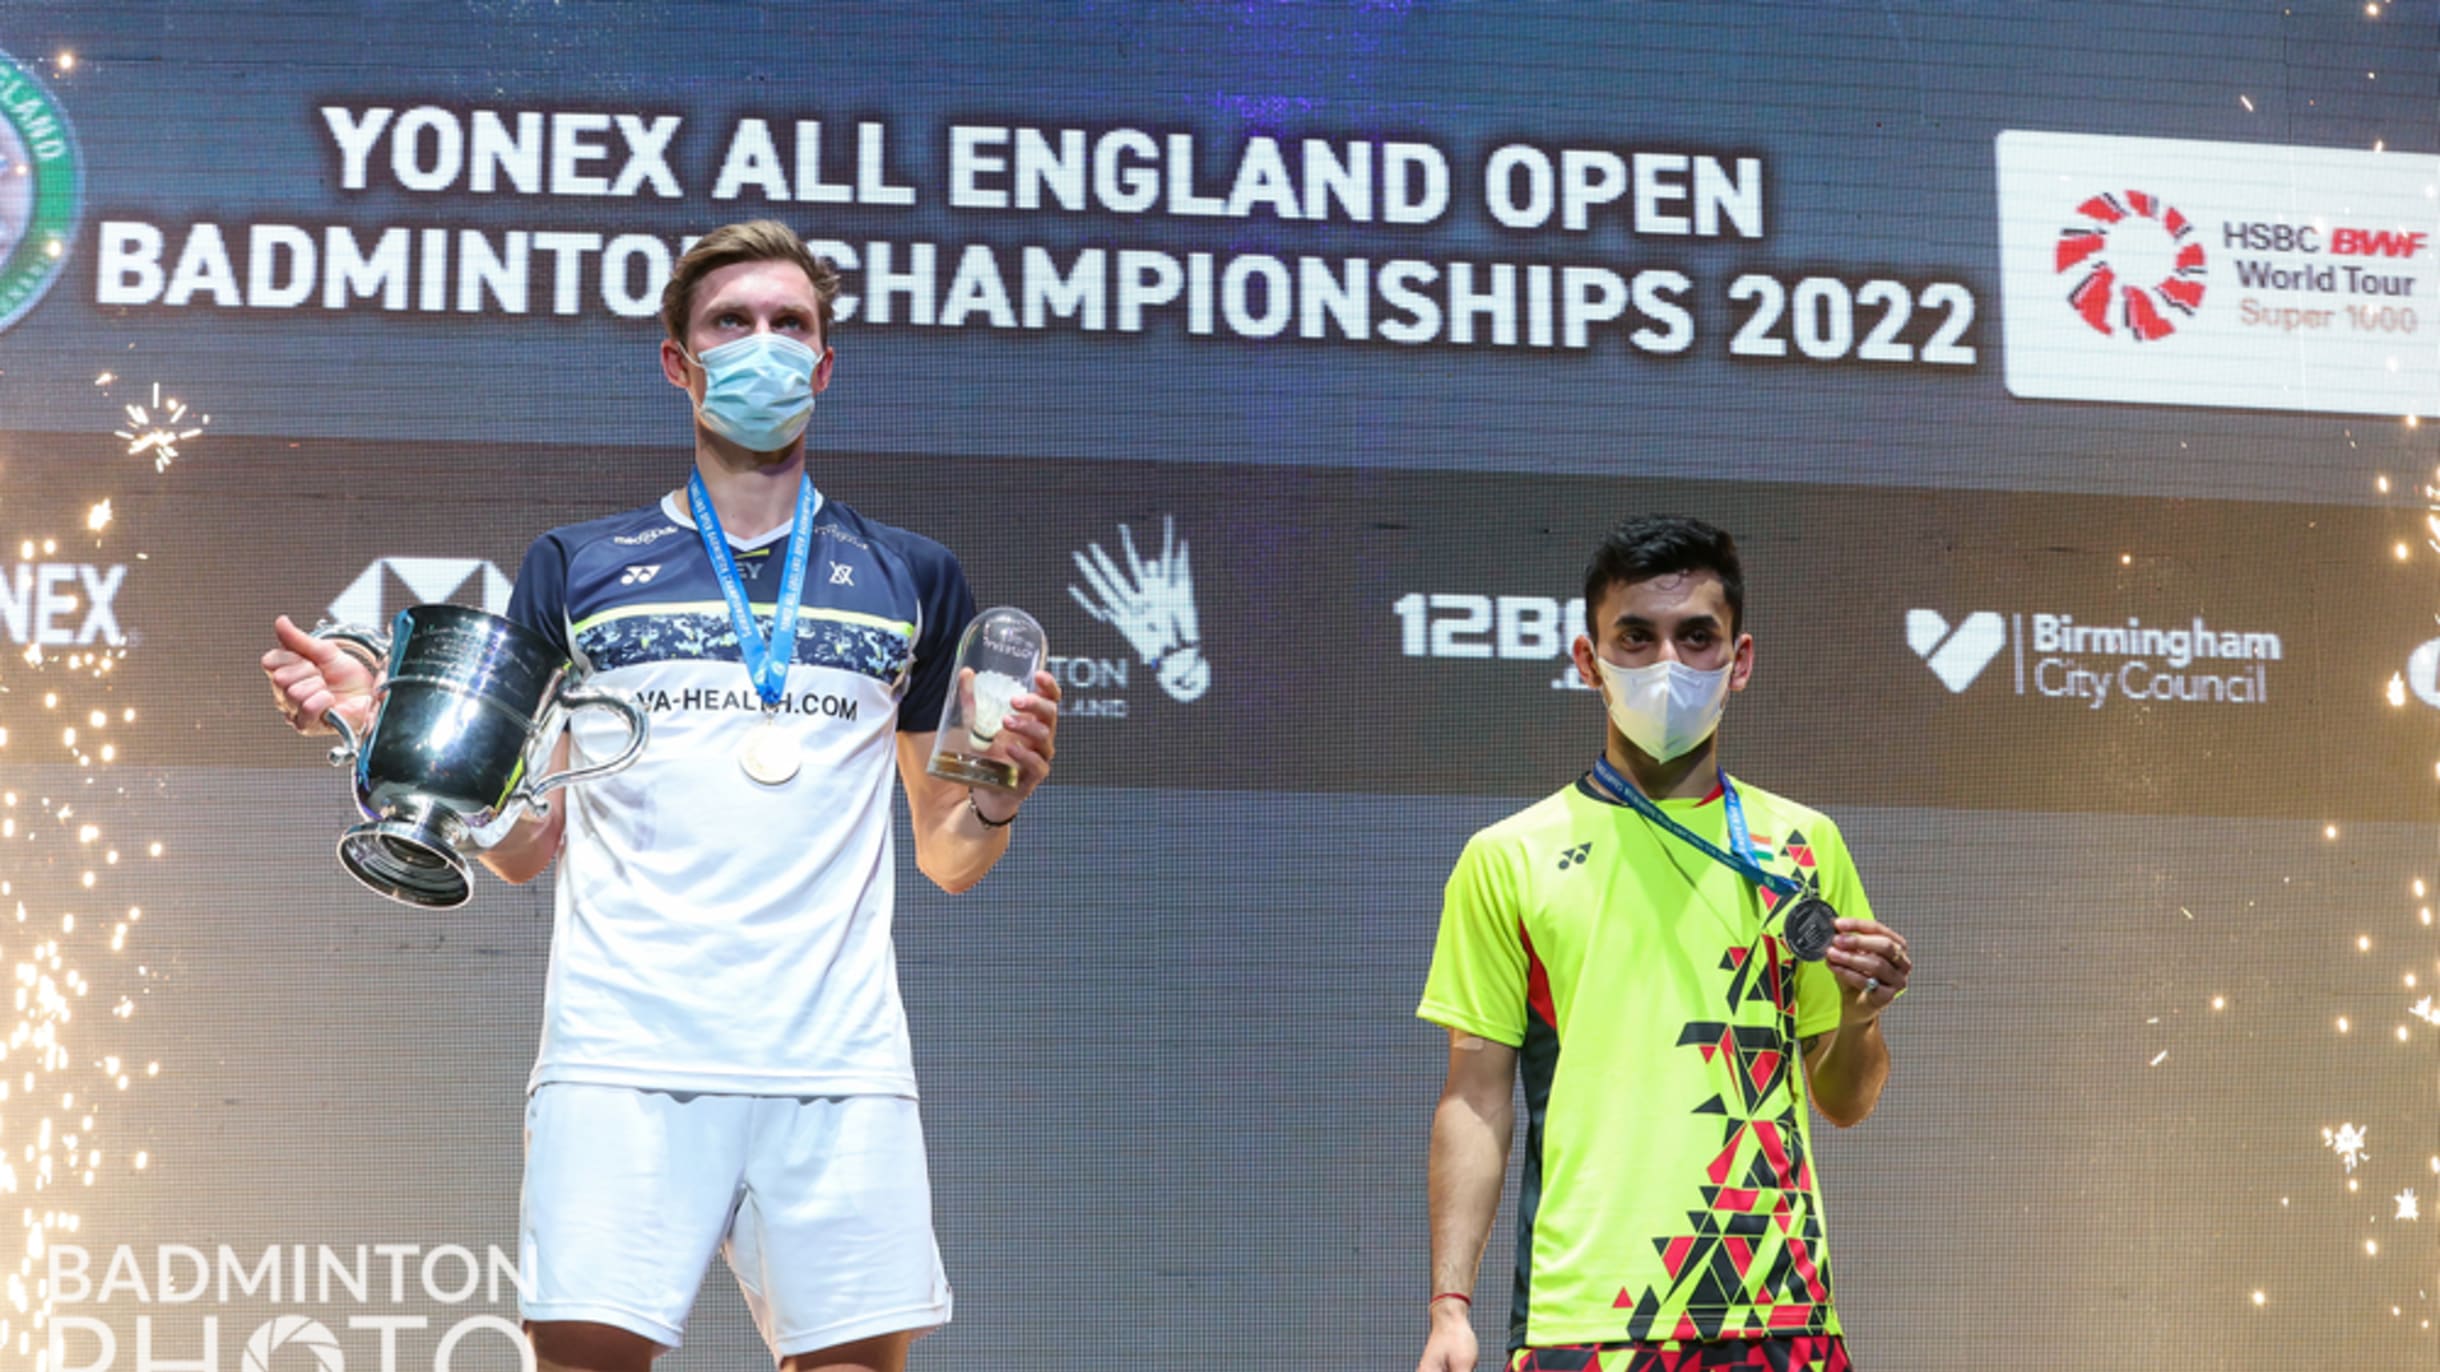 latest all england badminton result